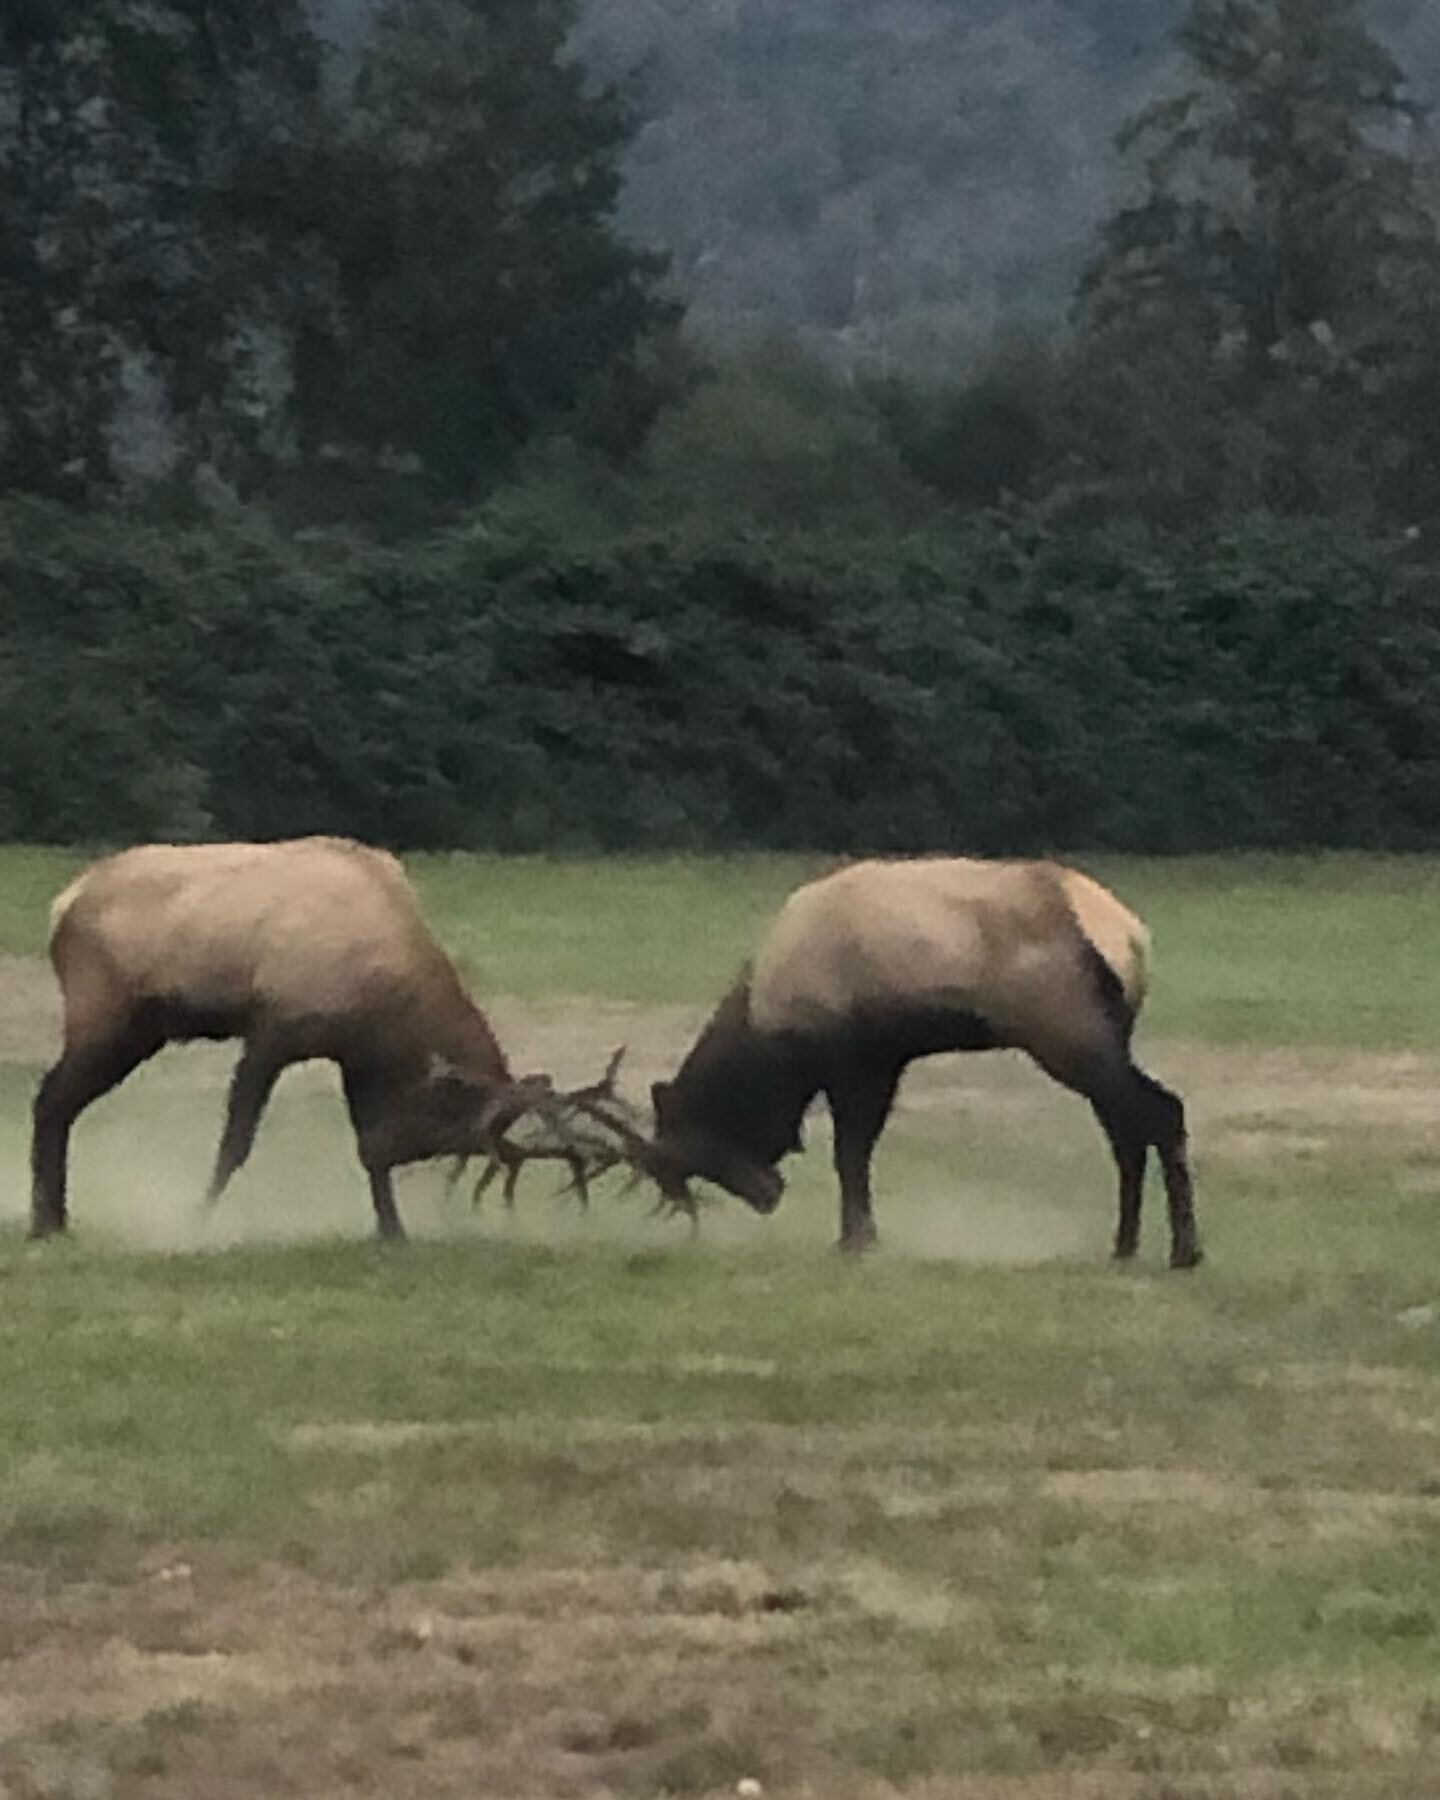 Some days, you wake up surrounded by greatness!  Opening the door to what feels like an @davidattenborough nature show: Elk fighting for mating rights, redwoods growing since the time of Christ&rsquo;s birth.

Other days you wake up to a random parki